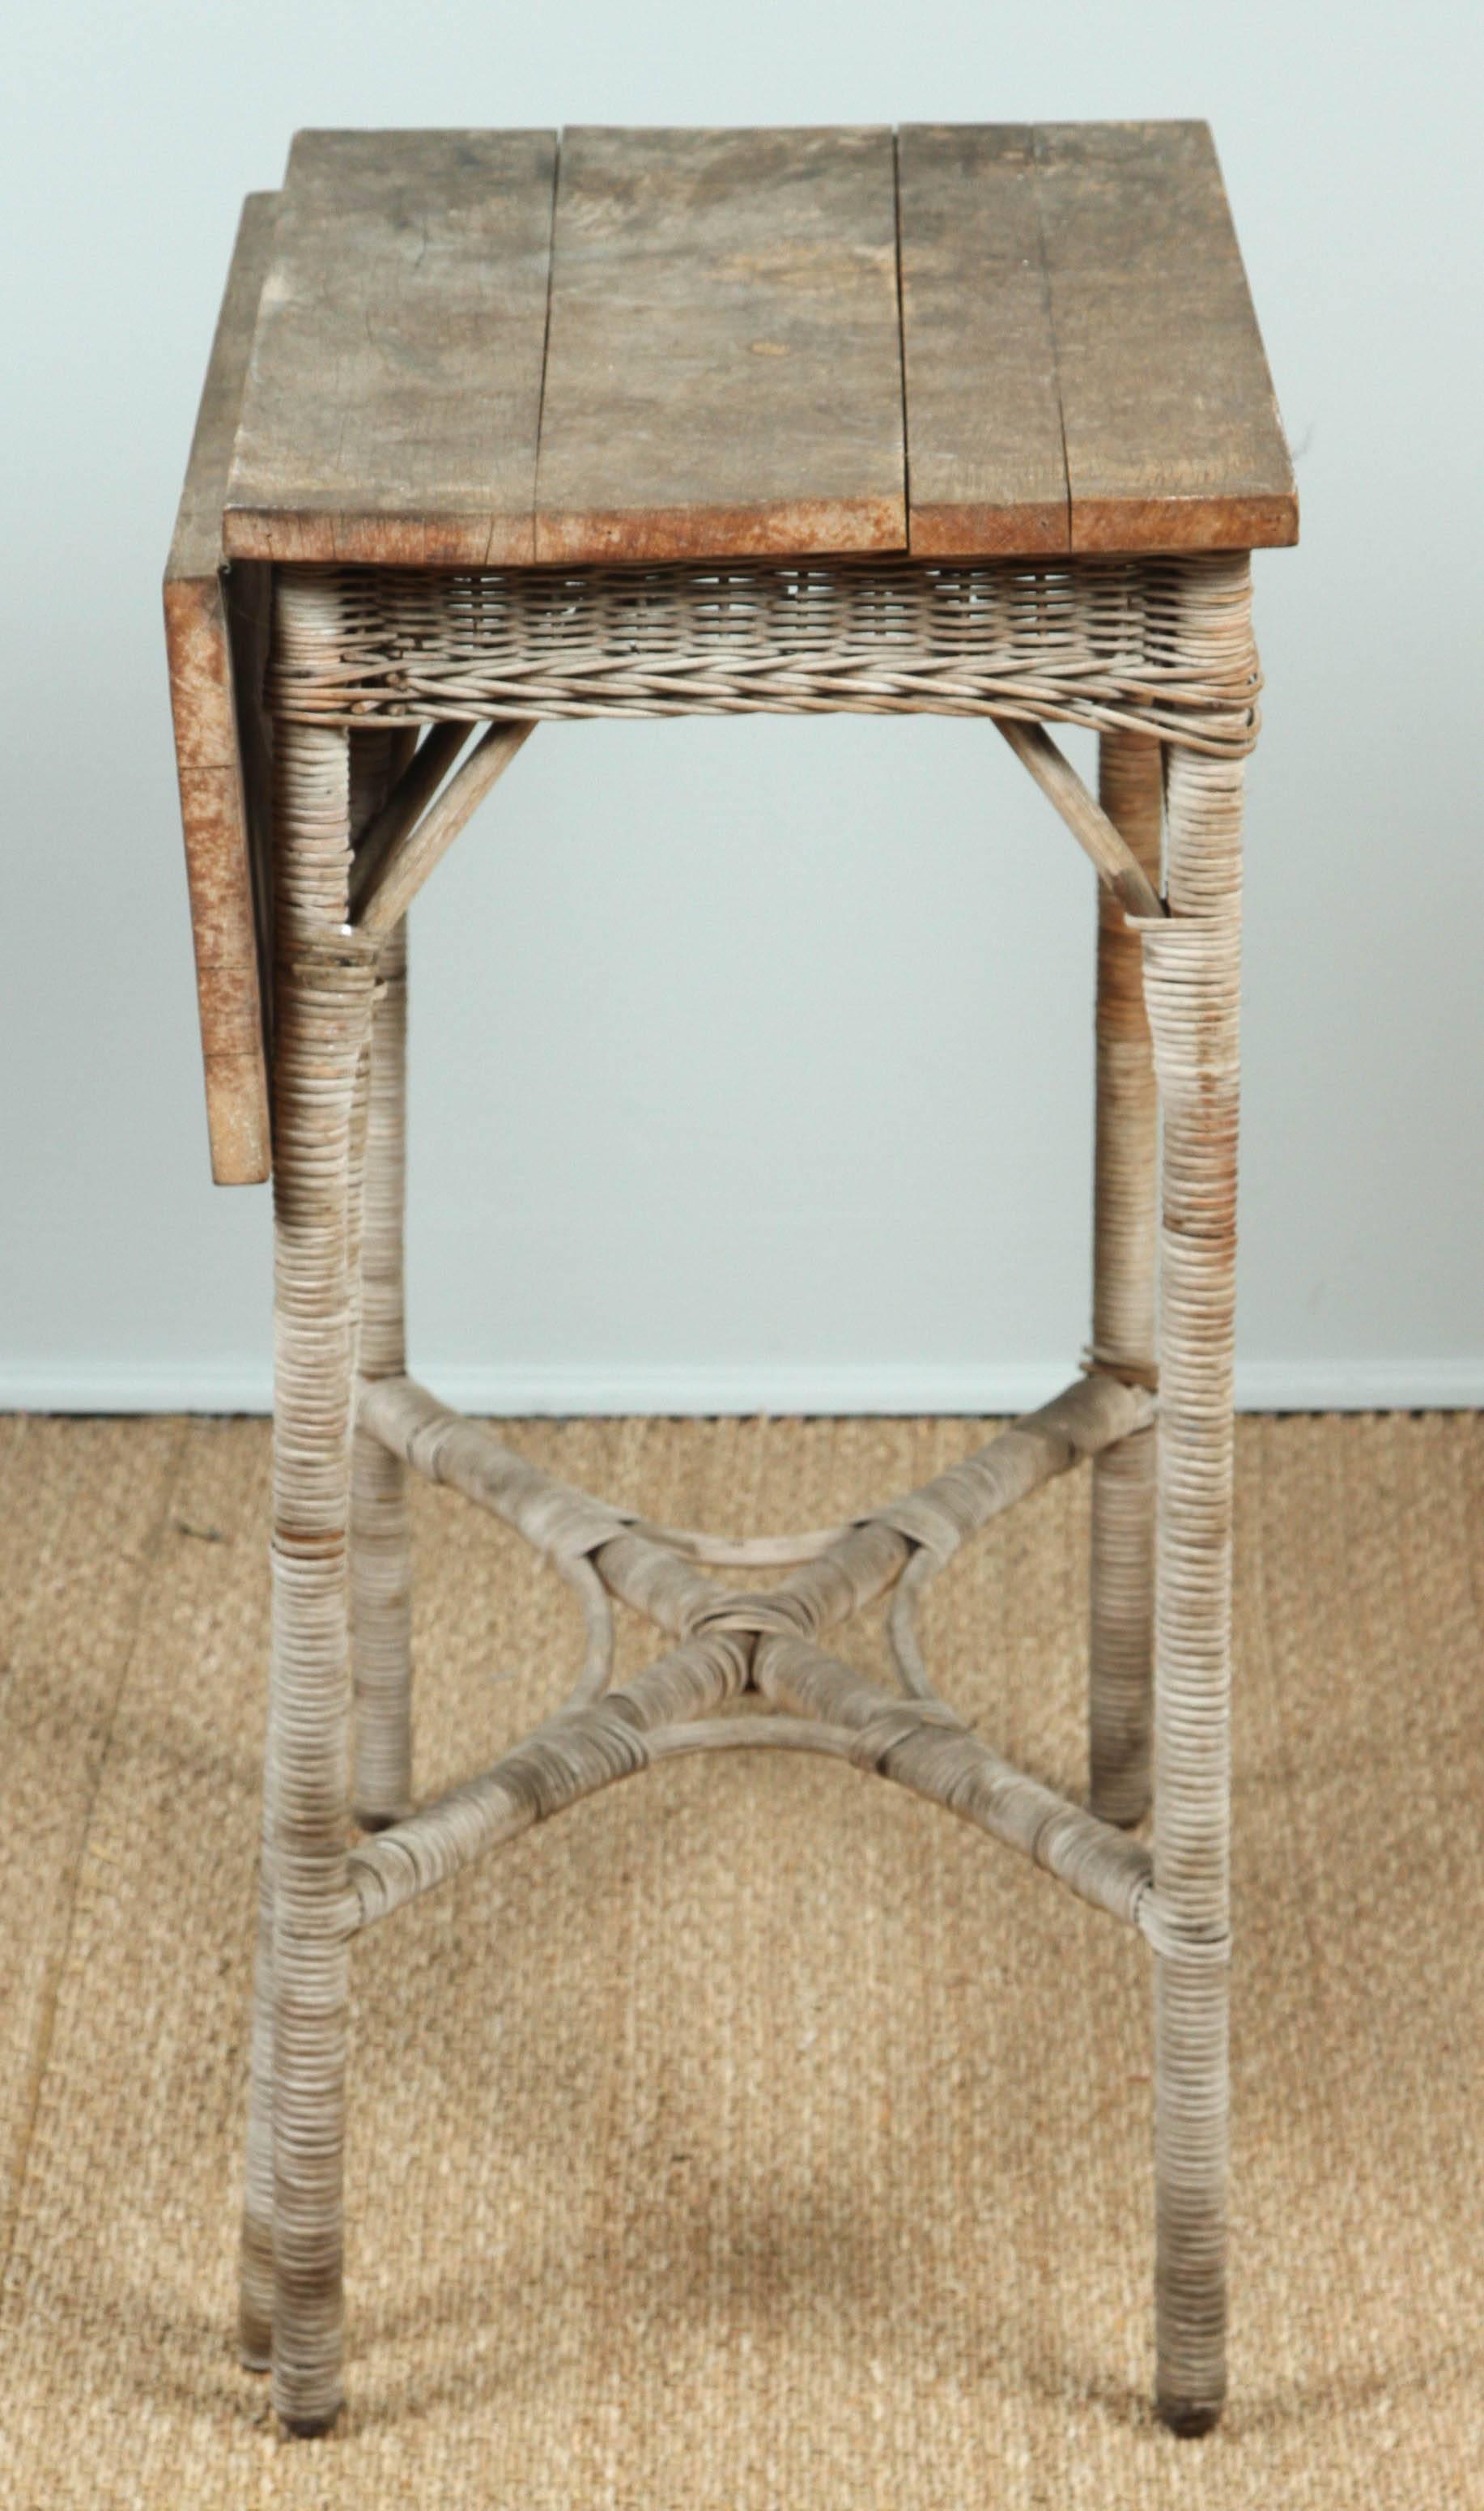 Rattan Vintage Wood and Wicker Small Gate Leg Table